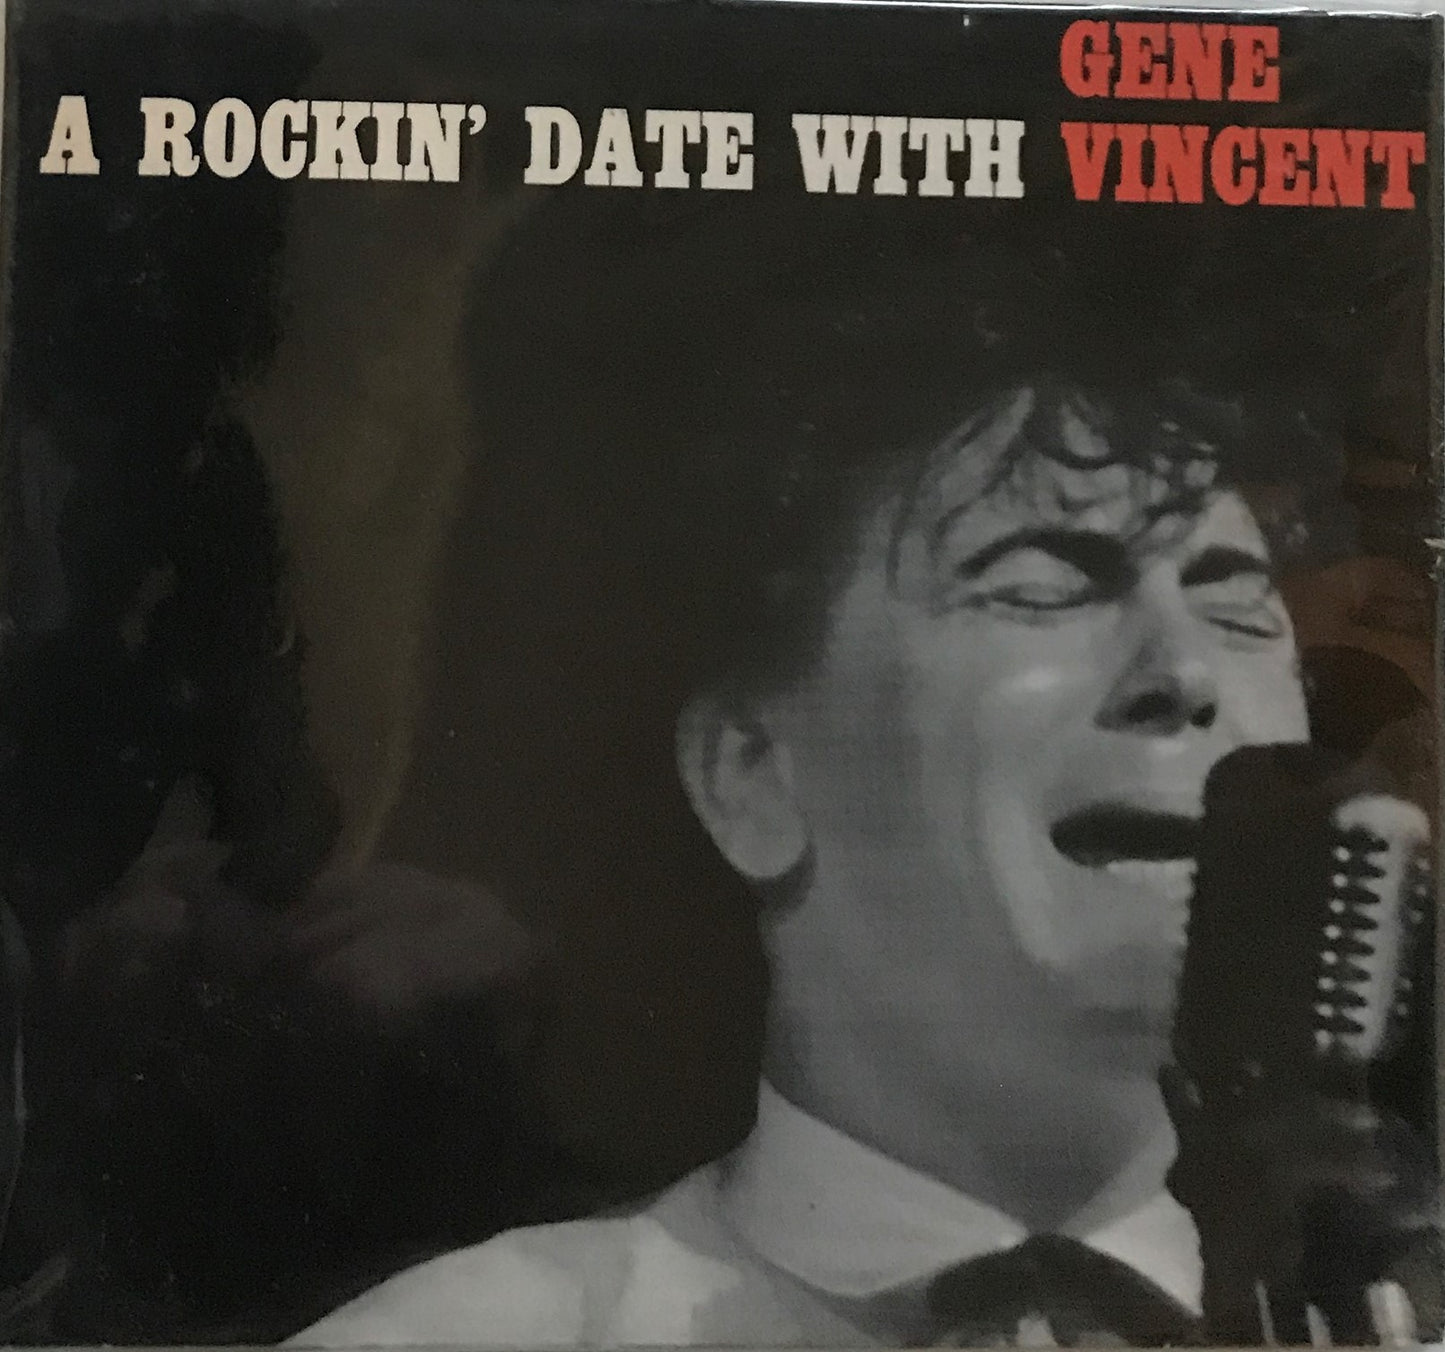 CD - Gene Vincent - A Rockin' Date With